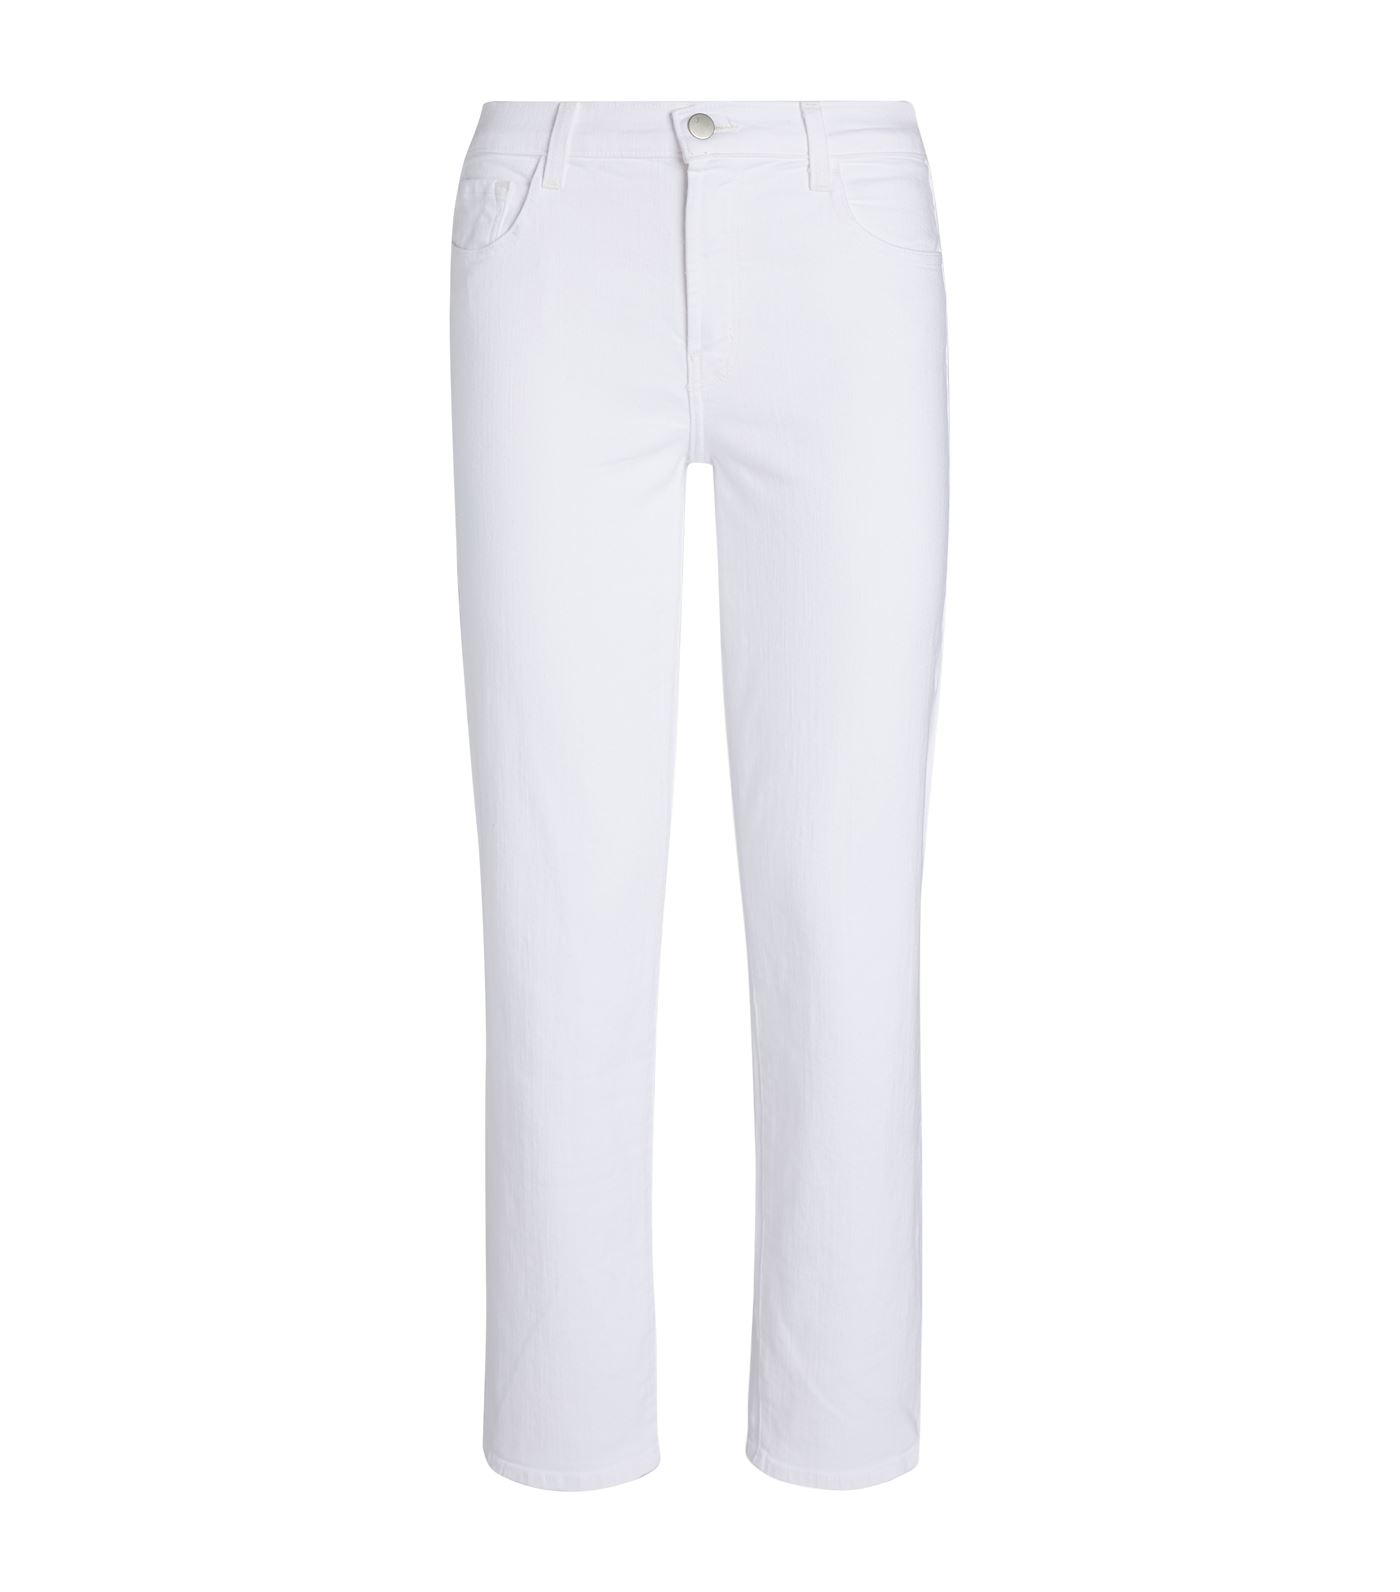 J Brand - A classic style that proves to be a staple style for both smart and casual occasions, J Br